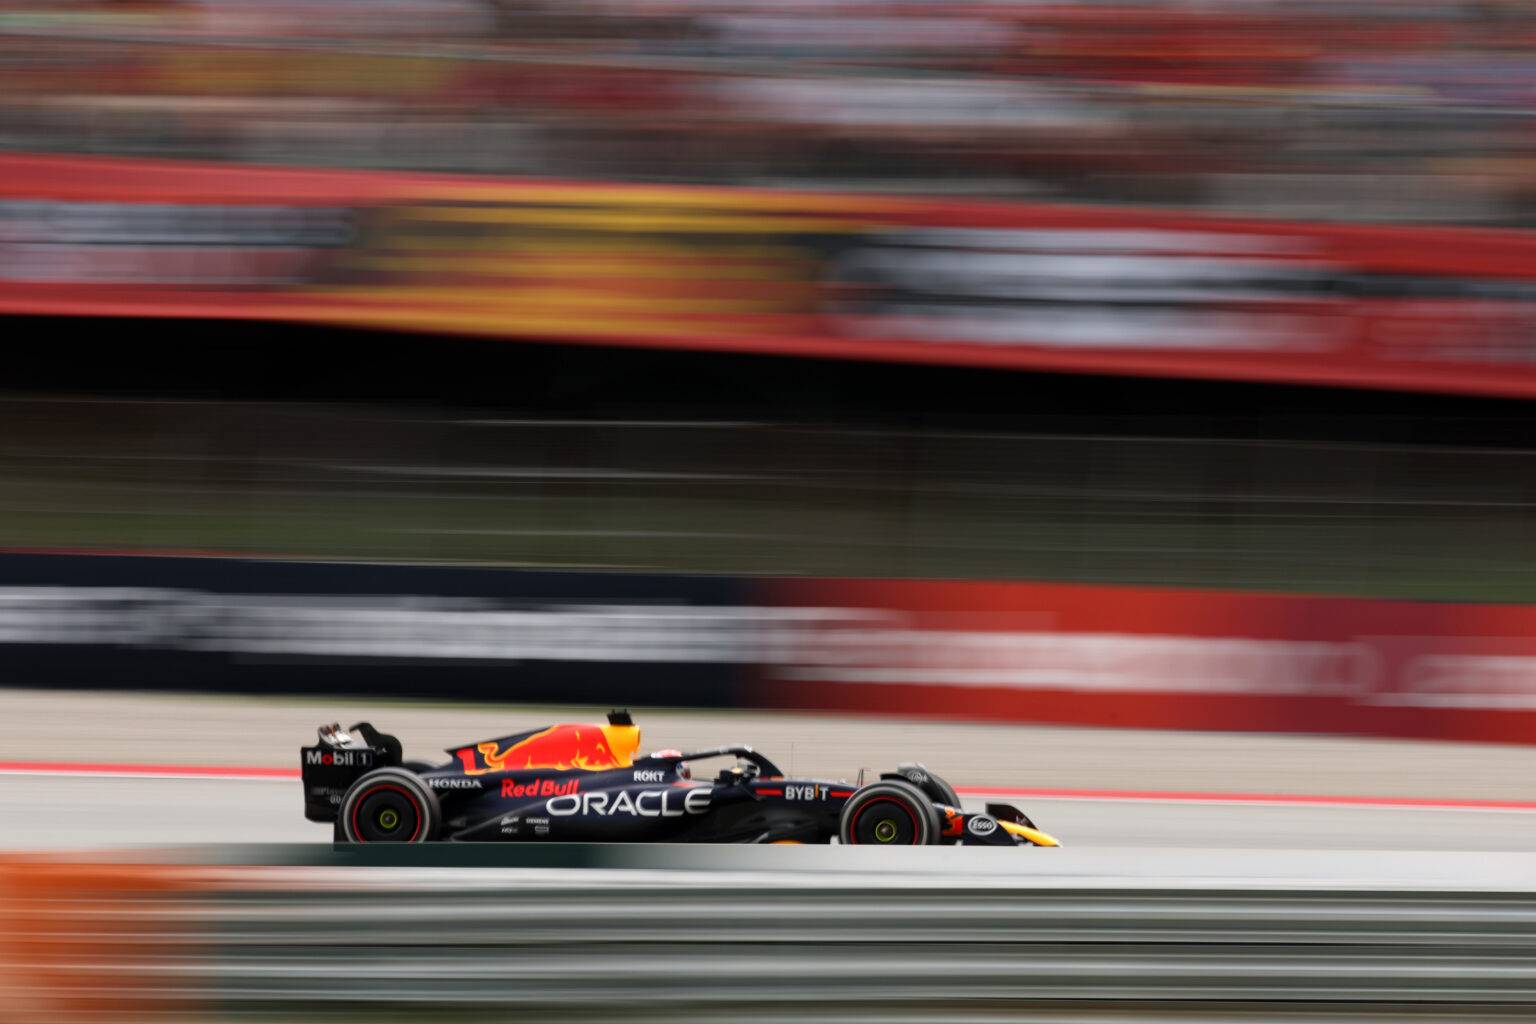 Formula One won’t bend rules to stop Red Bull – but rivals can close the gap